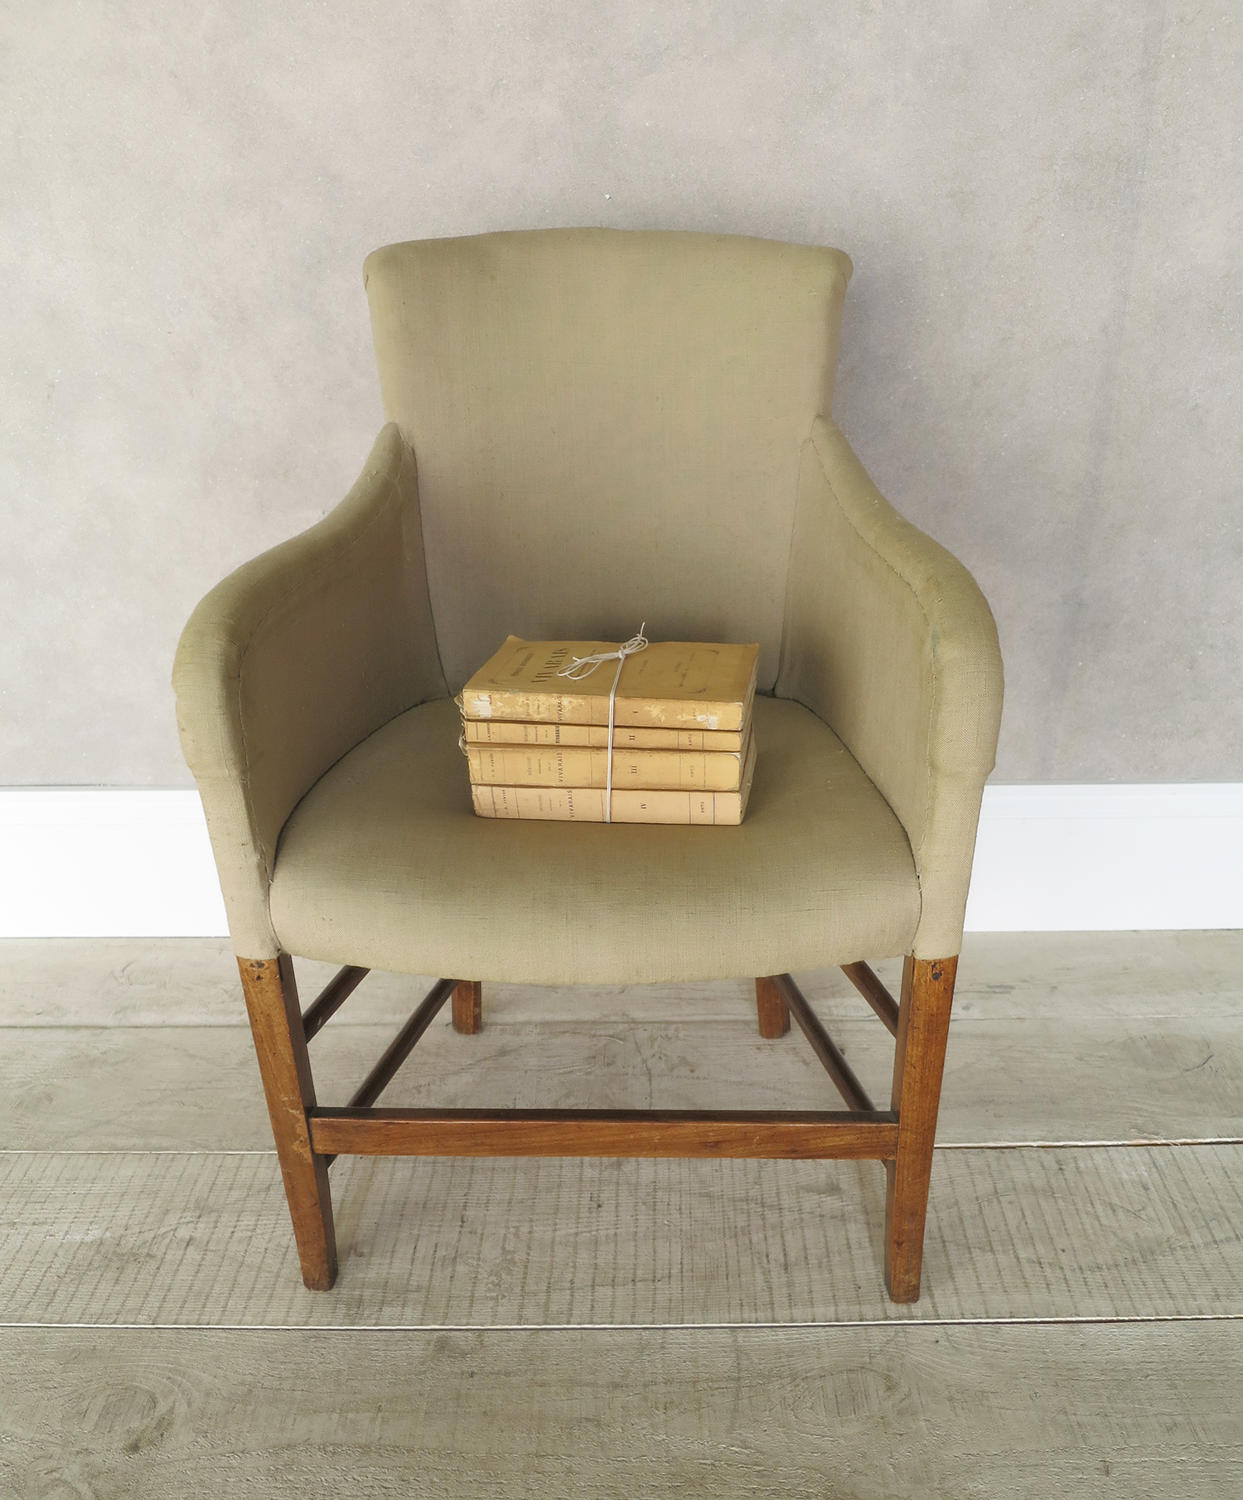 Single 19th c French Chair clad in old linen